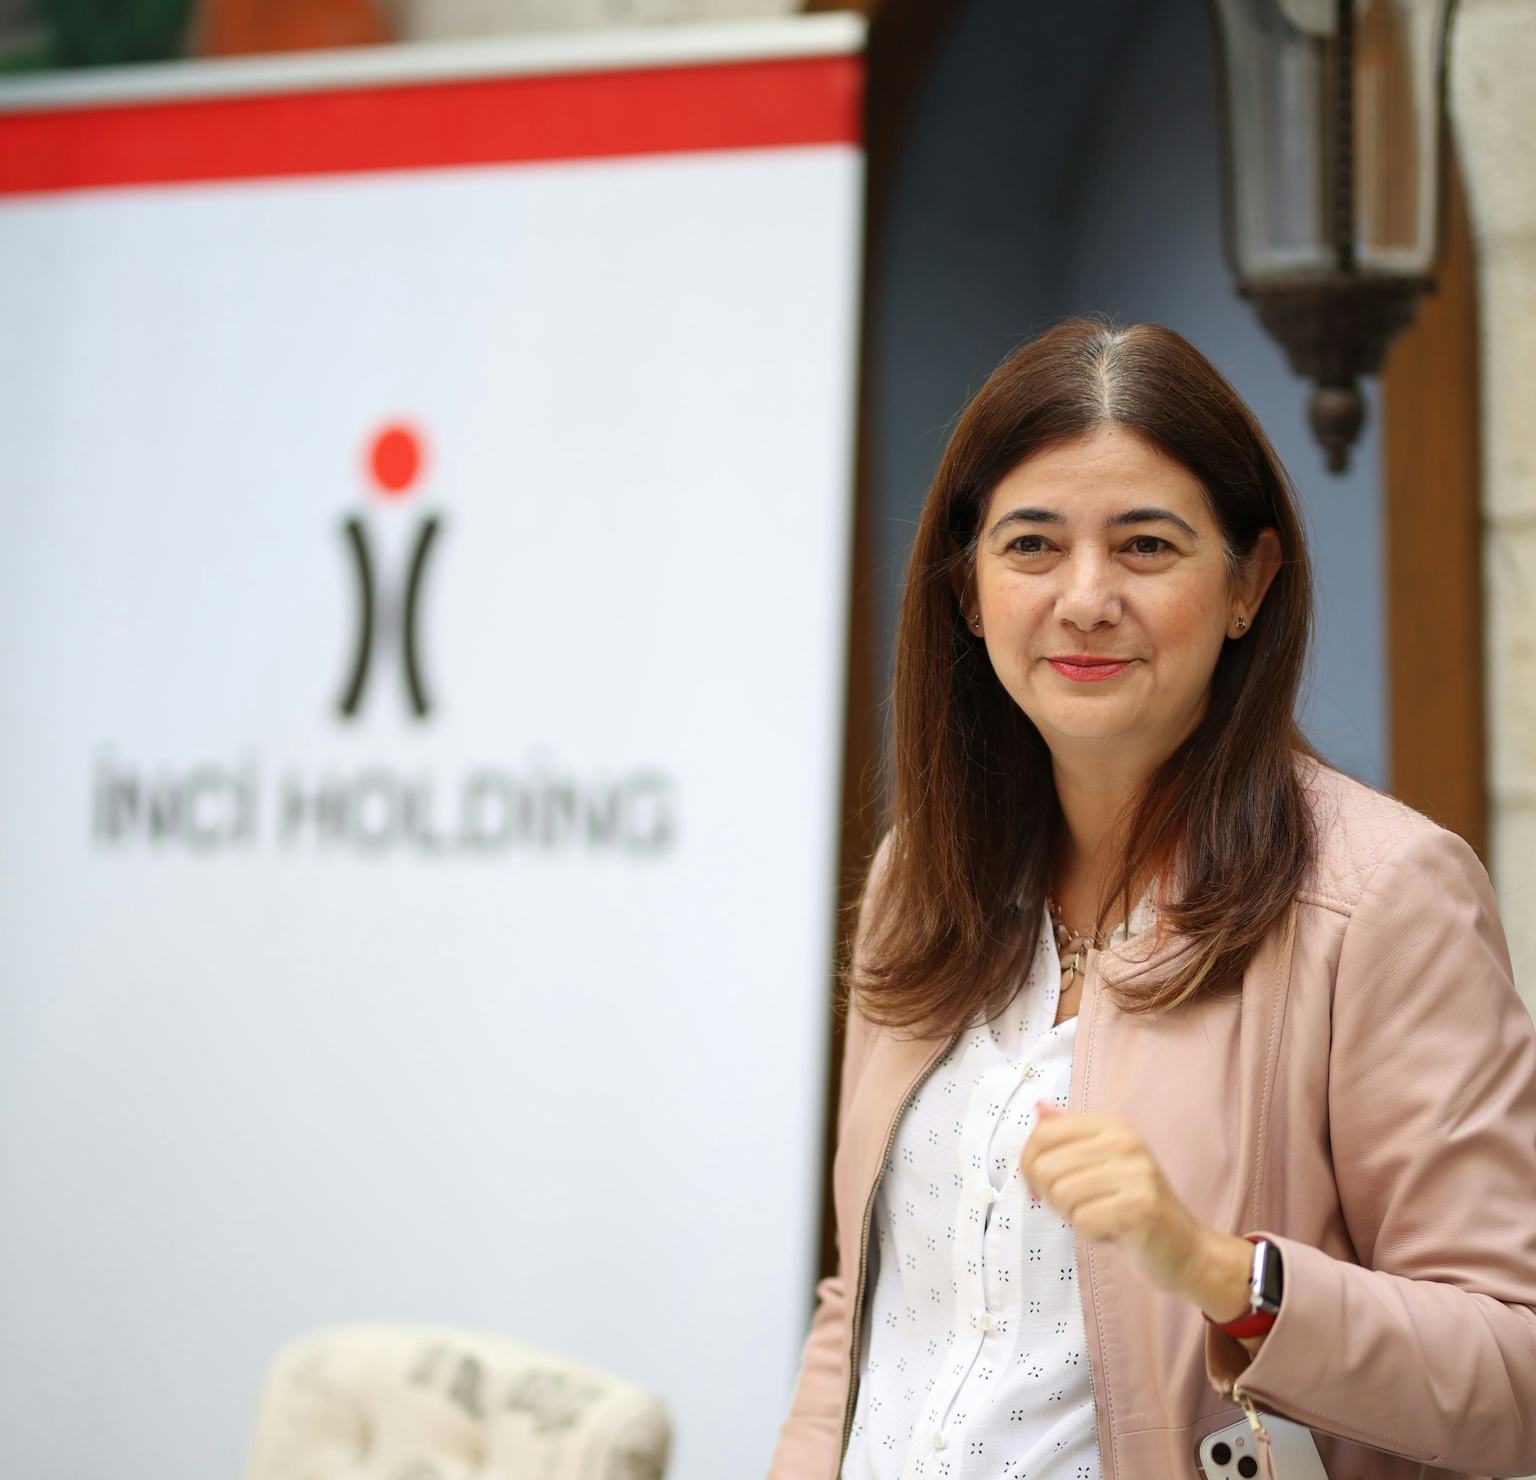 Celebrating its 70th anniversary, İnci Holding continues to add value to the future